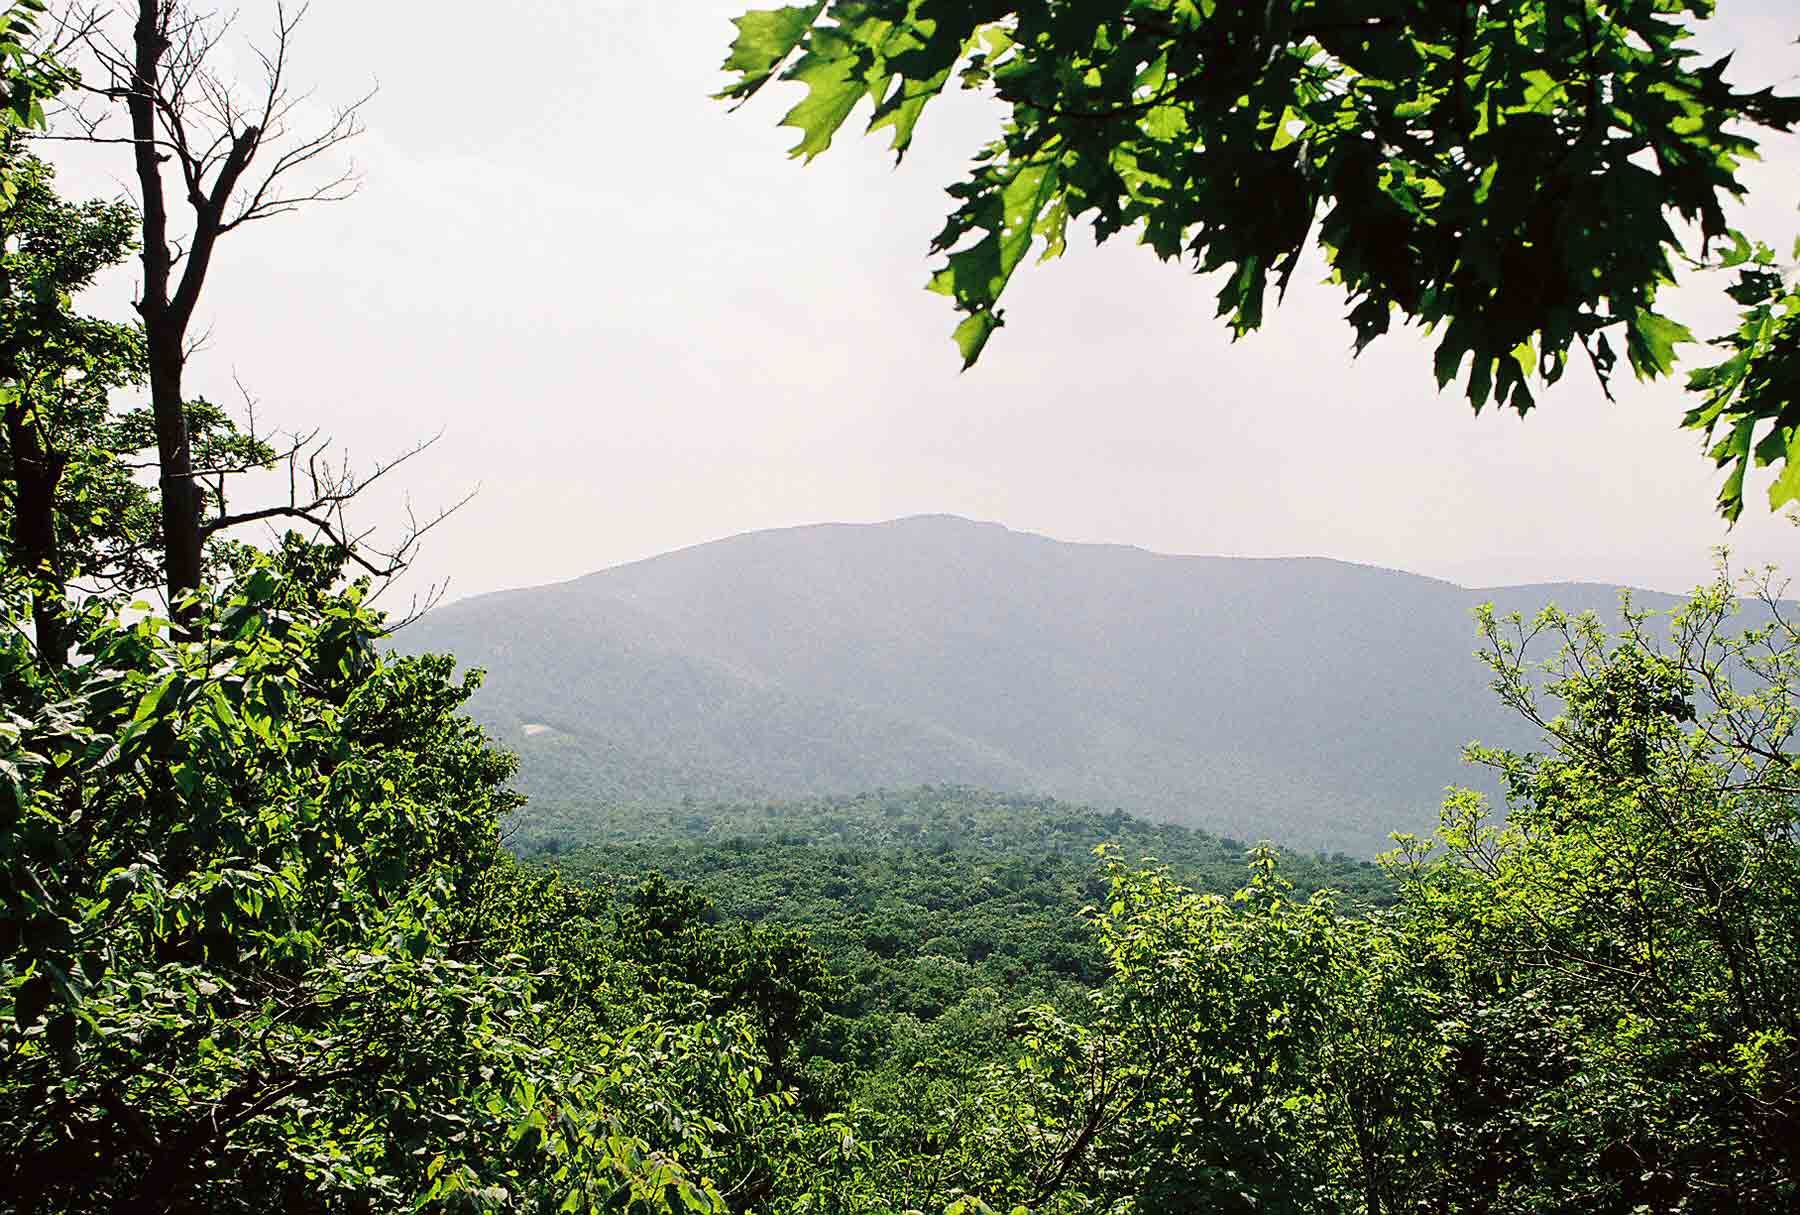 mm 12.0 - View of Hogback Mt. from viewpoint on S. Marshall Mt. (May 2004).  Courtesy dlcul@conncoll.edu